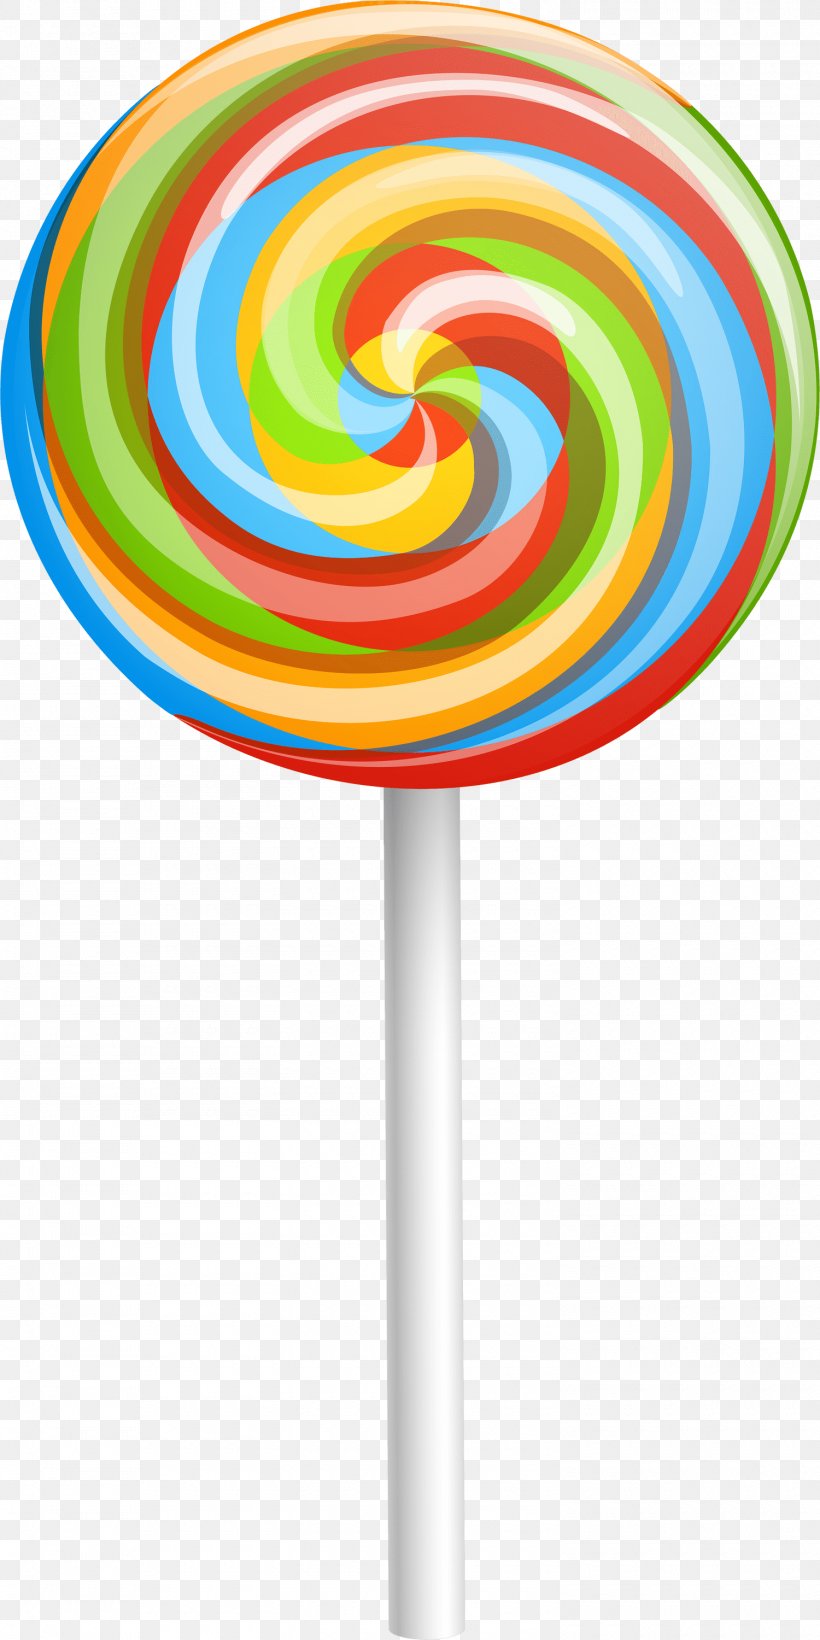 Lollipop Candy Drawing Clip Art, PNG, 1500x3000px, Lollipop, Candy, Color, Confectionery, Drawing Download Free